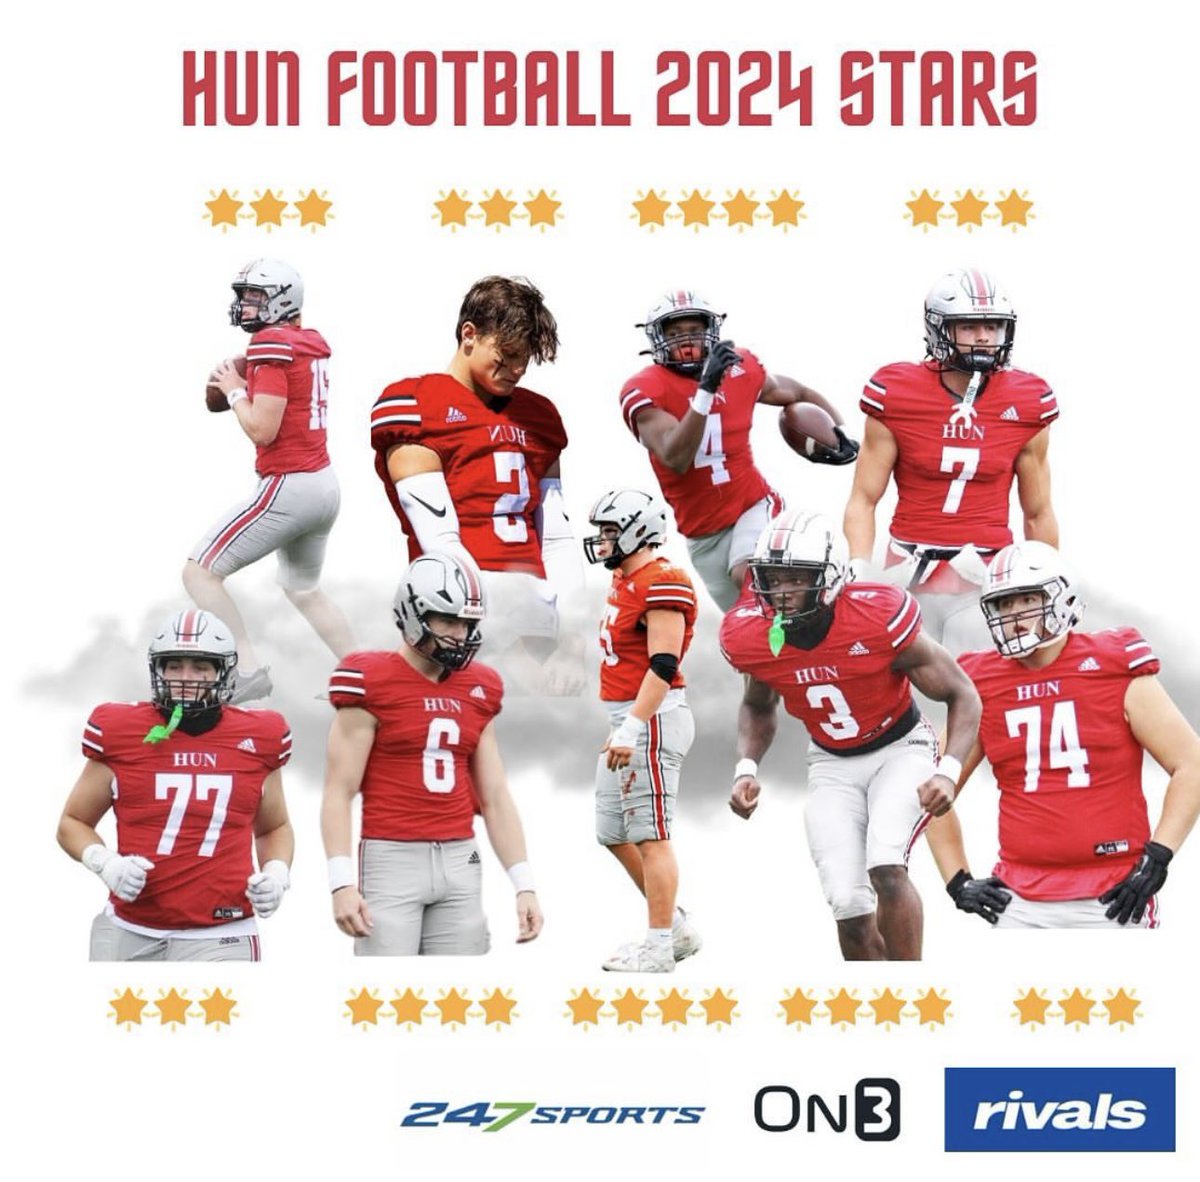 The BEST coaches, The BEST players, The BEST attitude, The BEST in the North East😤 Plenty of unranked kids that deserve rankings as-well. @Red_Zone75 @michaelhaynes97 @Tonyrazz03 #HunFootball